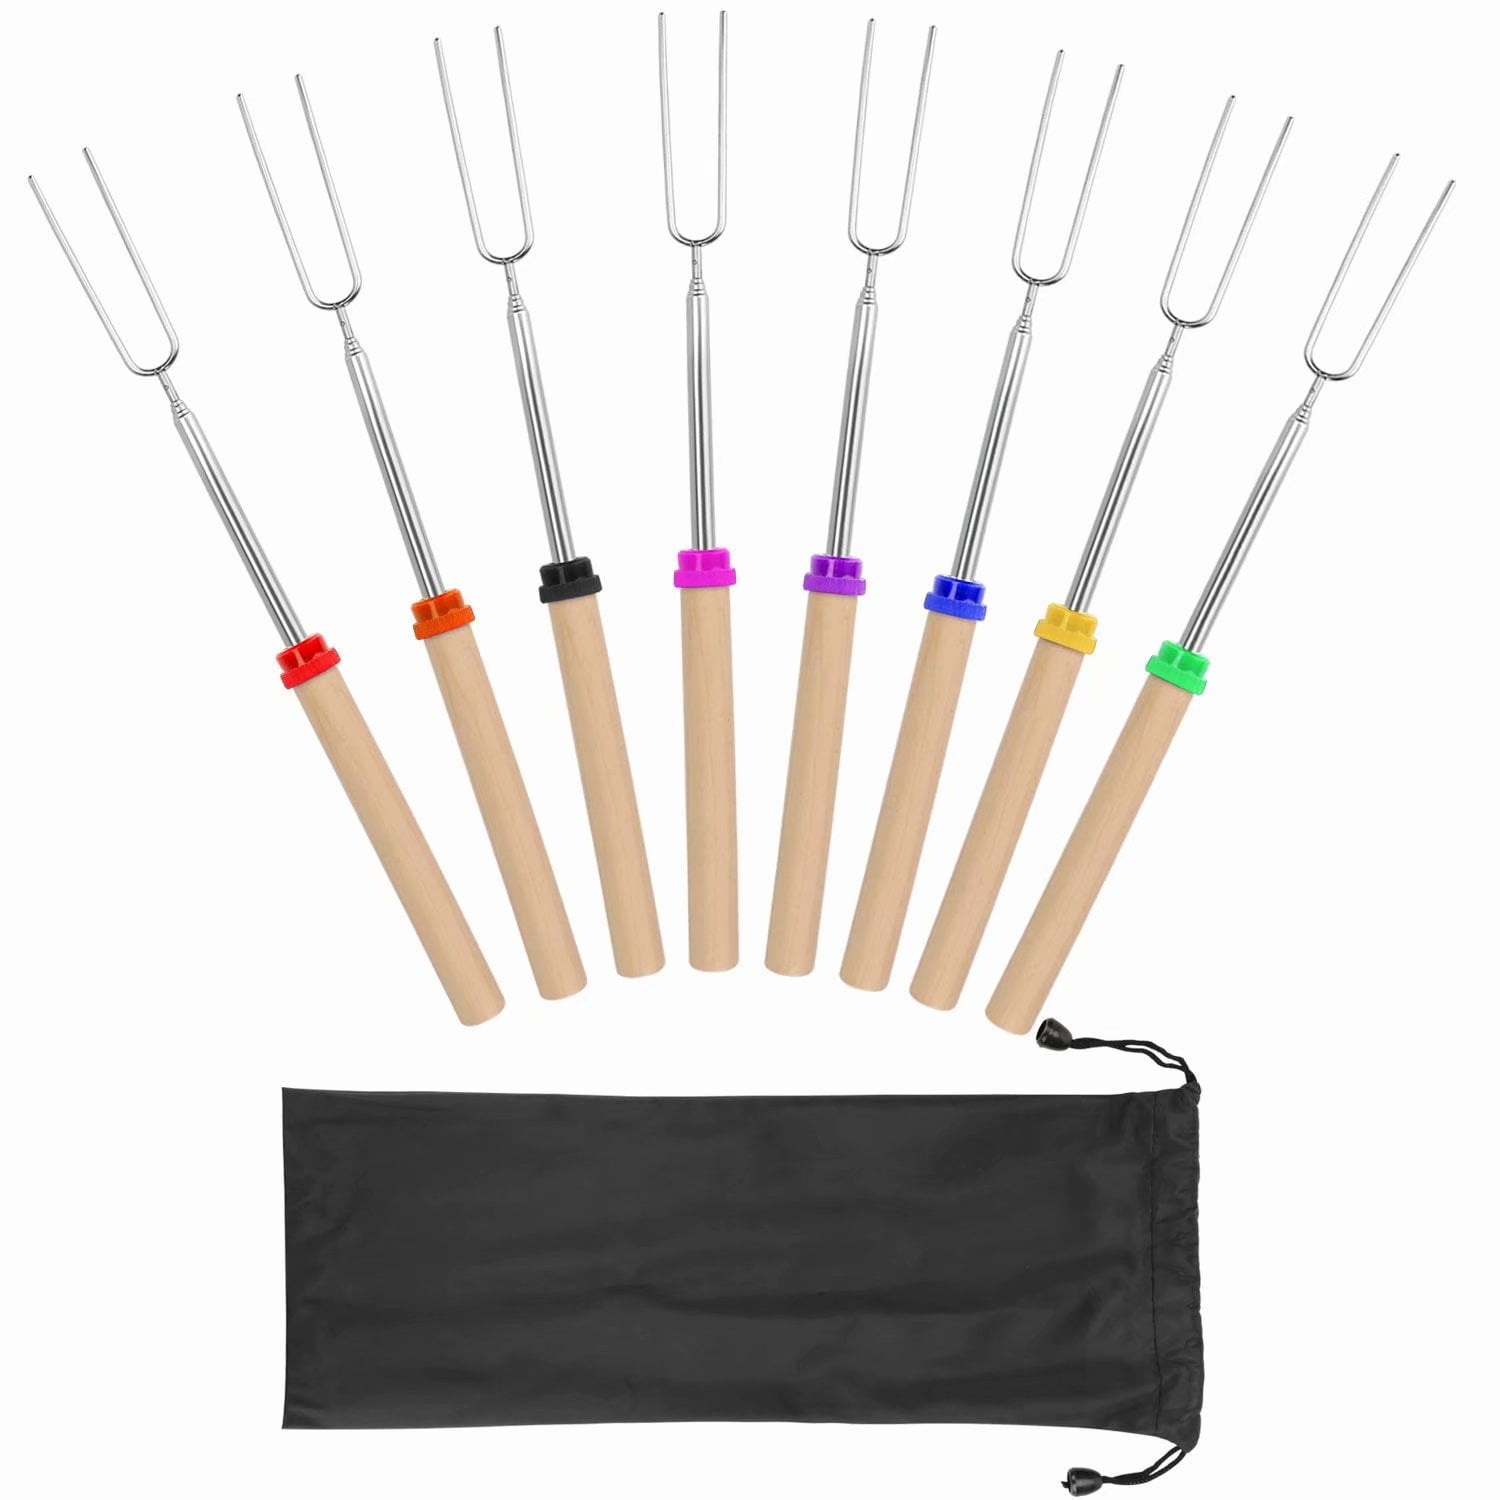 Marshmallow Roasting Sticks Stainless Steel Barbecue Forks Barbecue Skewers Roasting Needle Hot Dog BBQ Campfire Accessories with Wooden Handle Set of 7 Roasting Sticks 